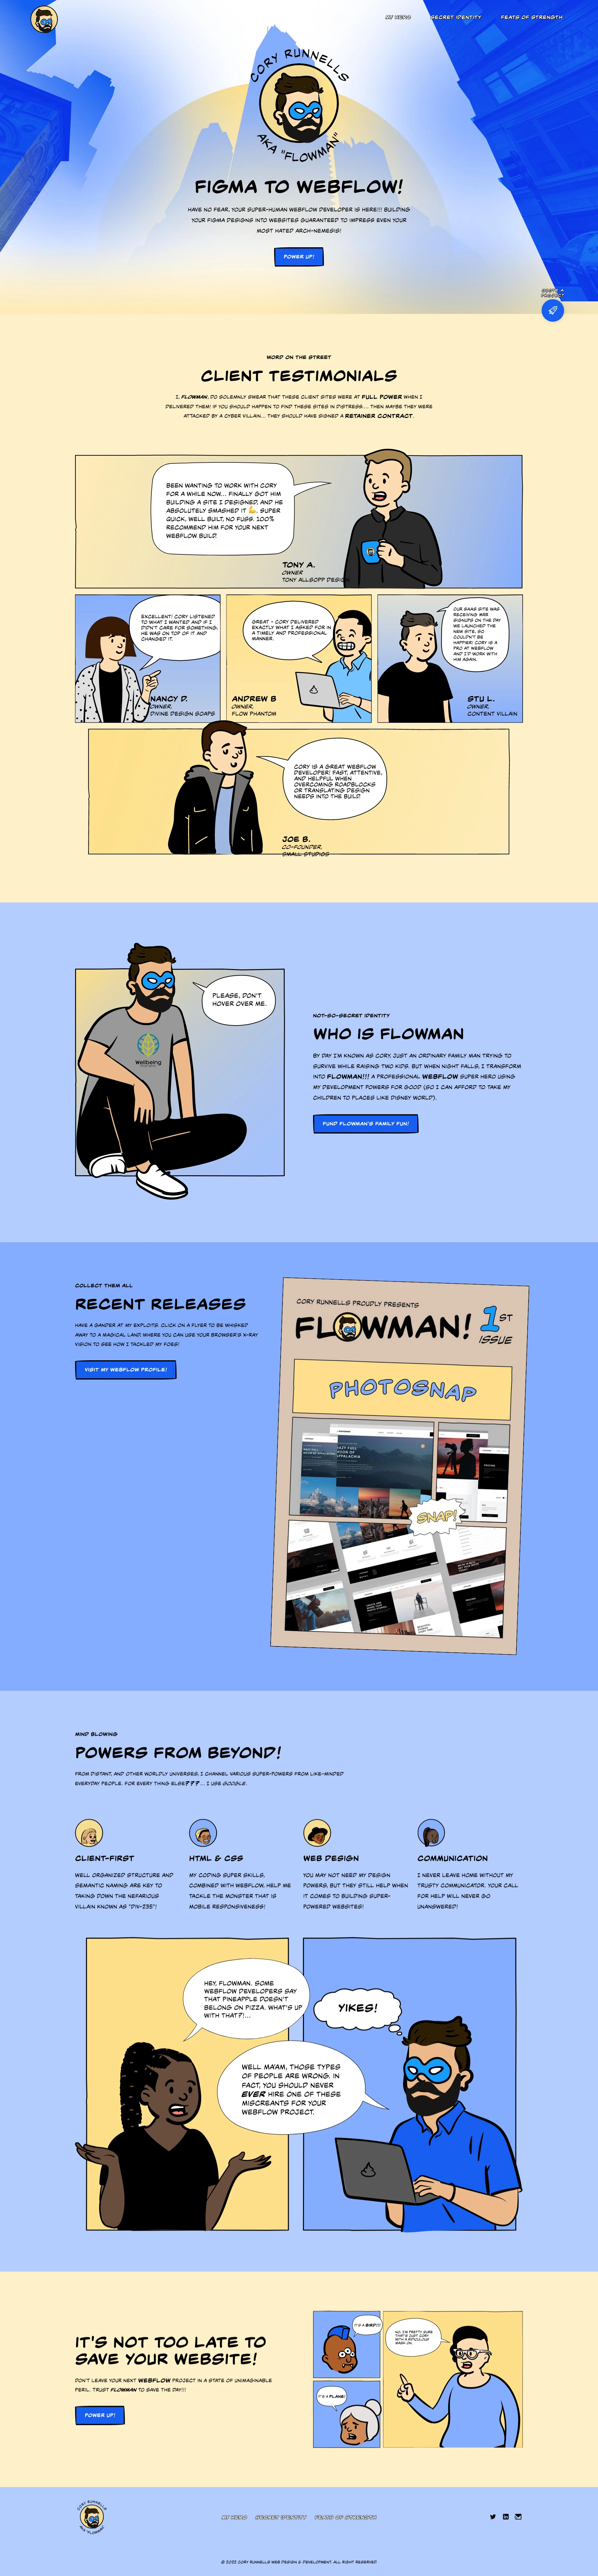 Flowman Landing Page Example: Professional Figma to Webflow development services provided by Cory Runnells, a.k.a Flowman. Have no fear, your super-human Webflow developer is here!!! Building your Figma designs into websites guaranteed to impress even your most hated arch-nemesis!